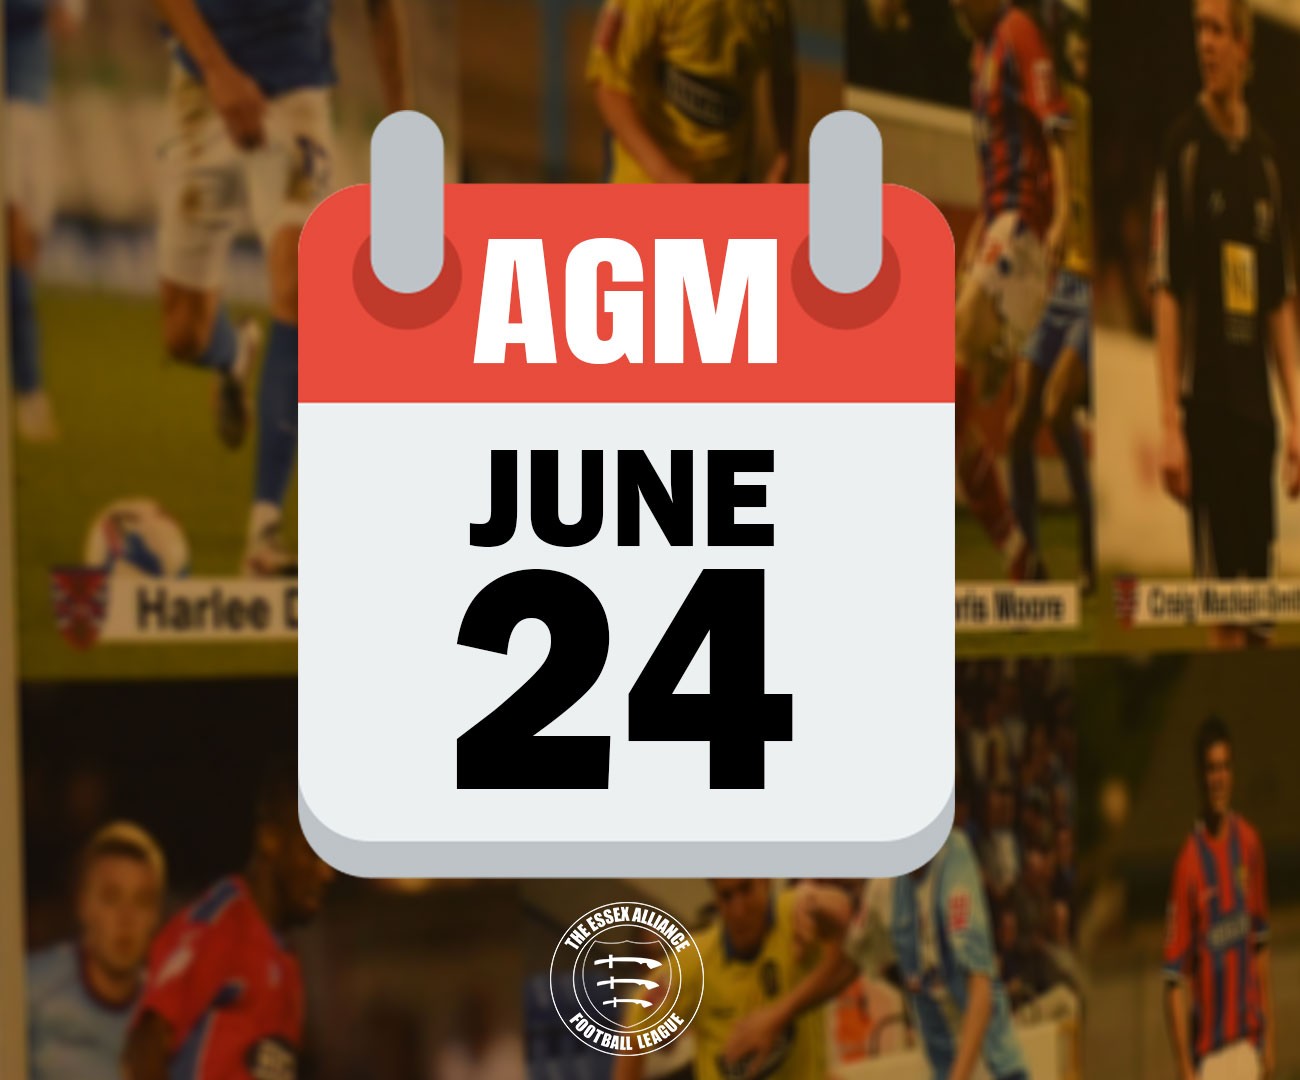 AGM and presentation date confirmed for Monday 24th June